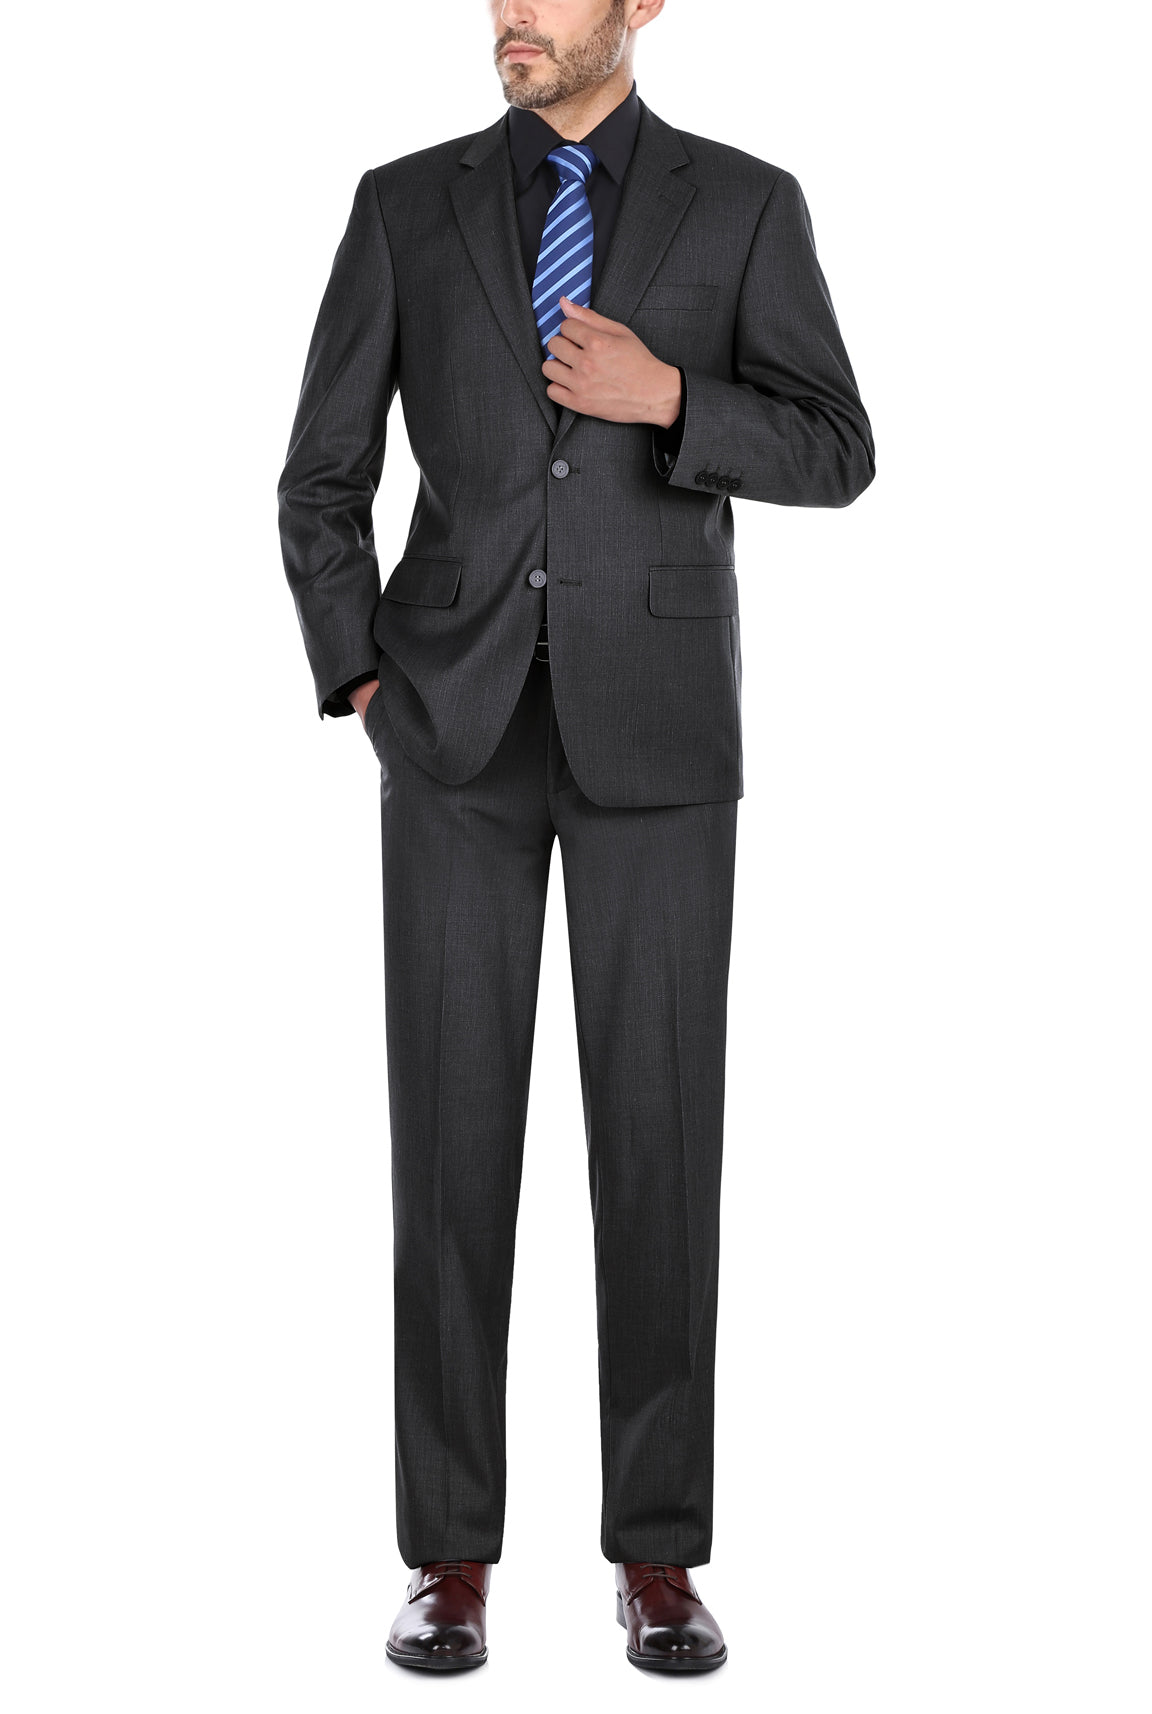 (40S) Slim Fit 2 Piece Suit 2 Buttons In Charcoal Gray